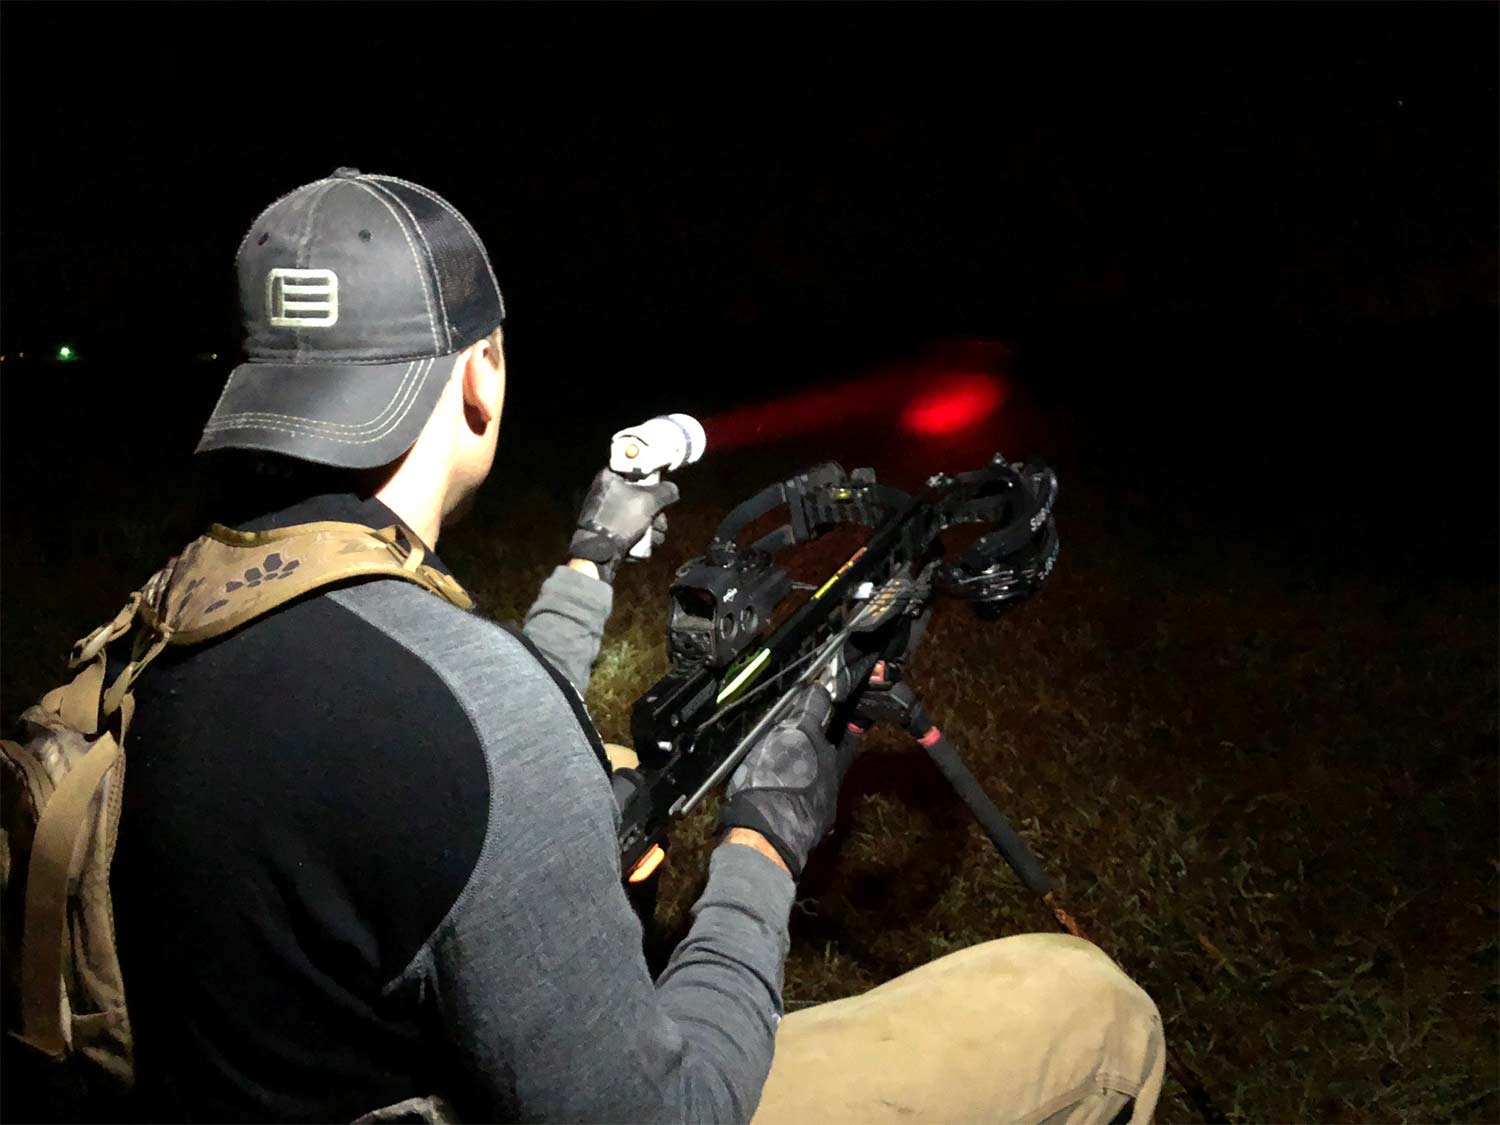 A man in a backwards cap uses a red flashlight at night.